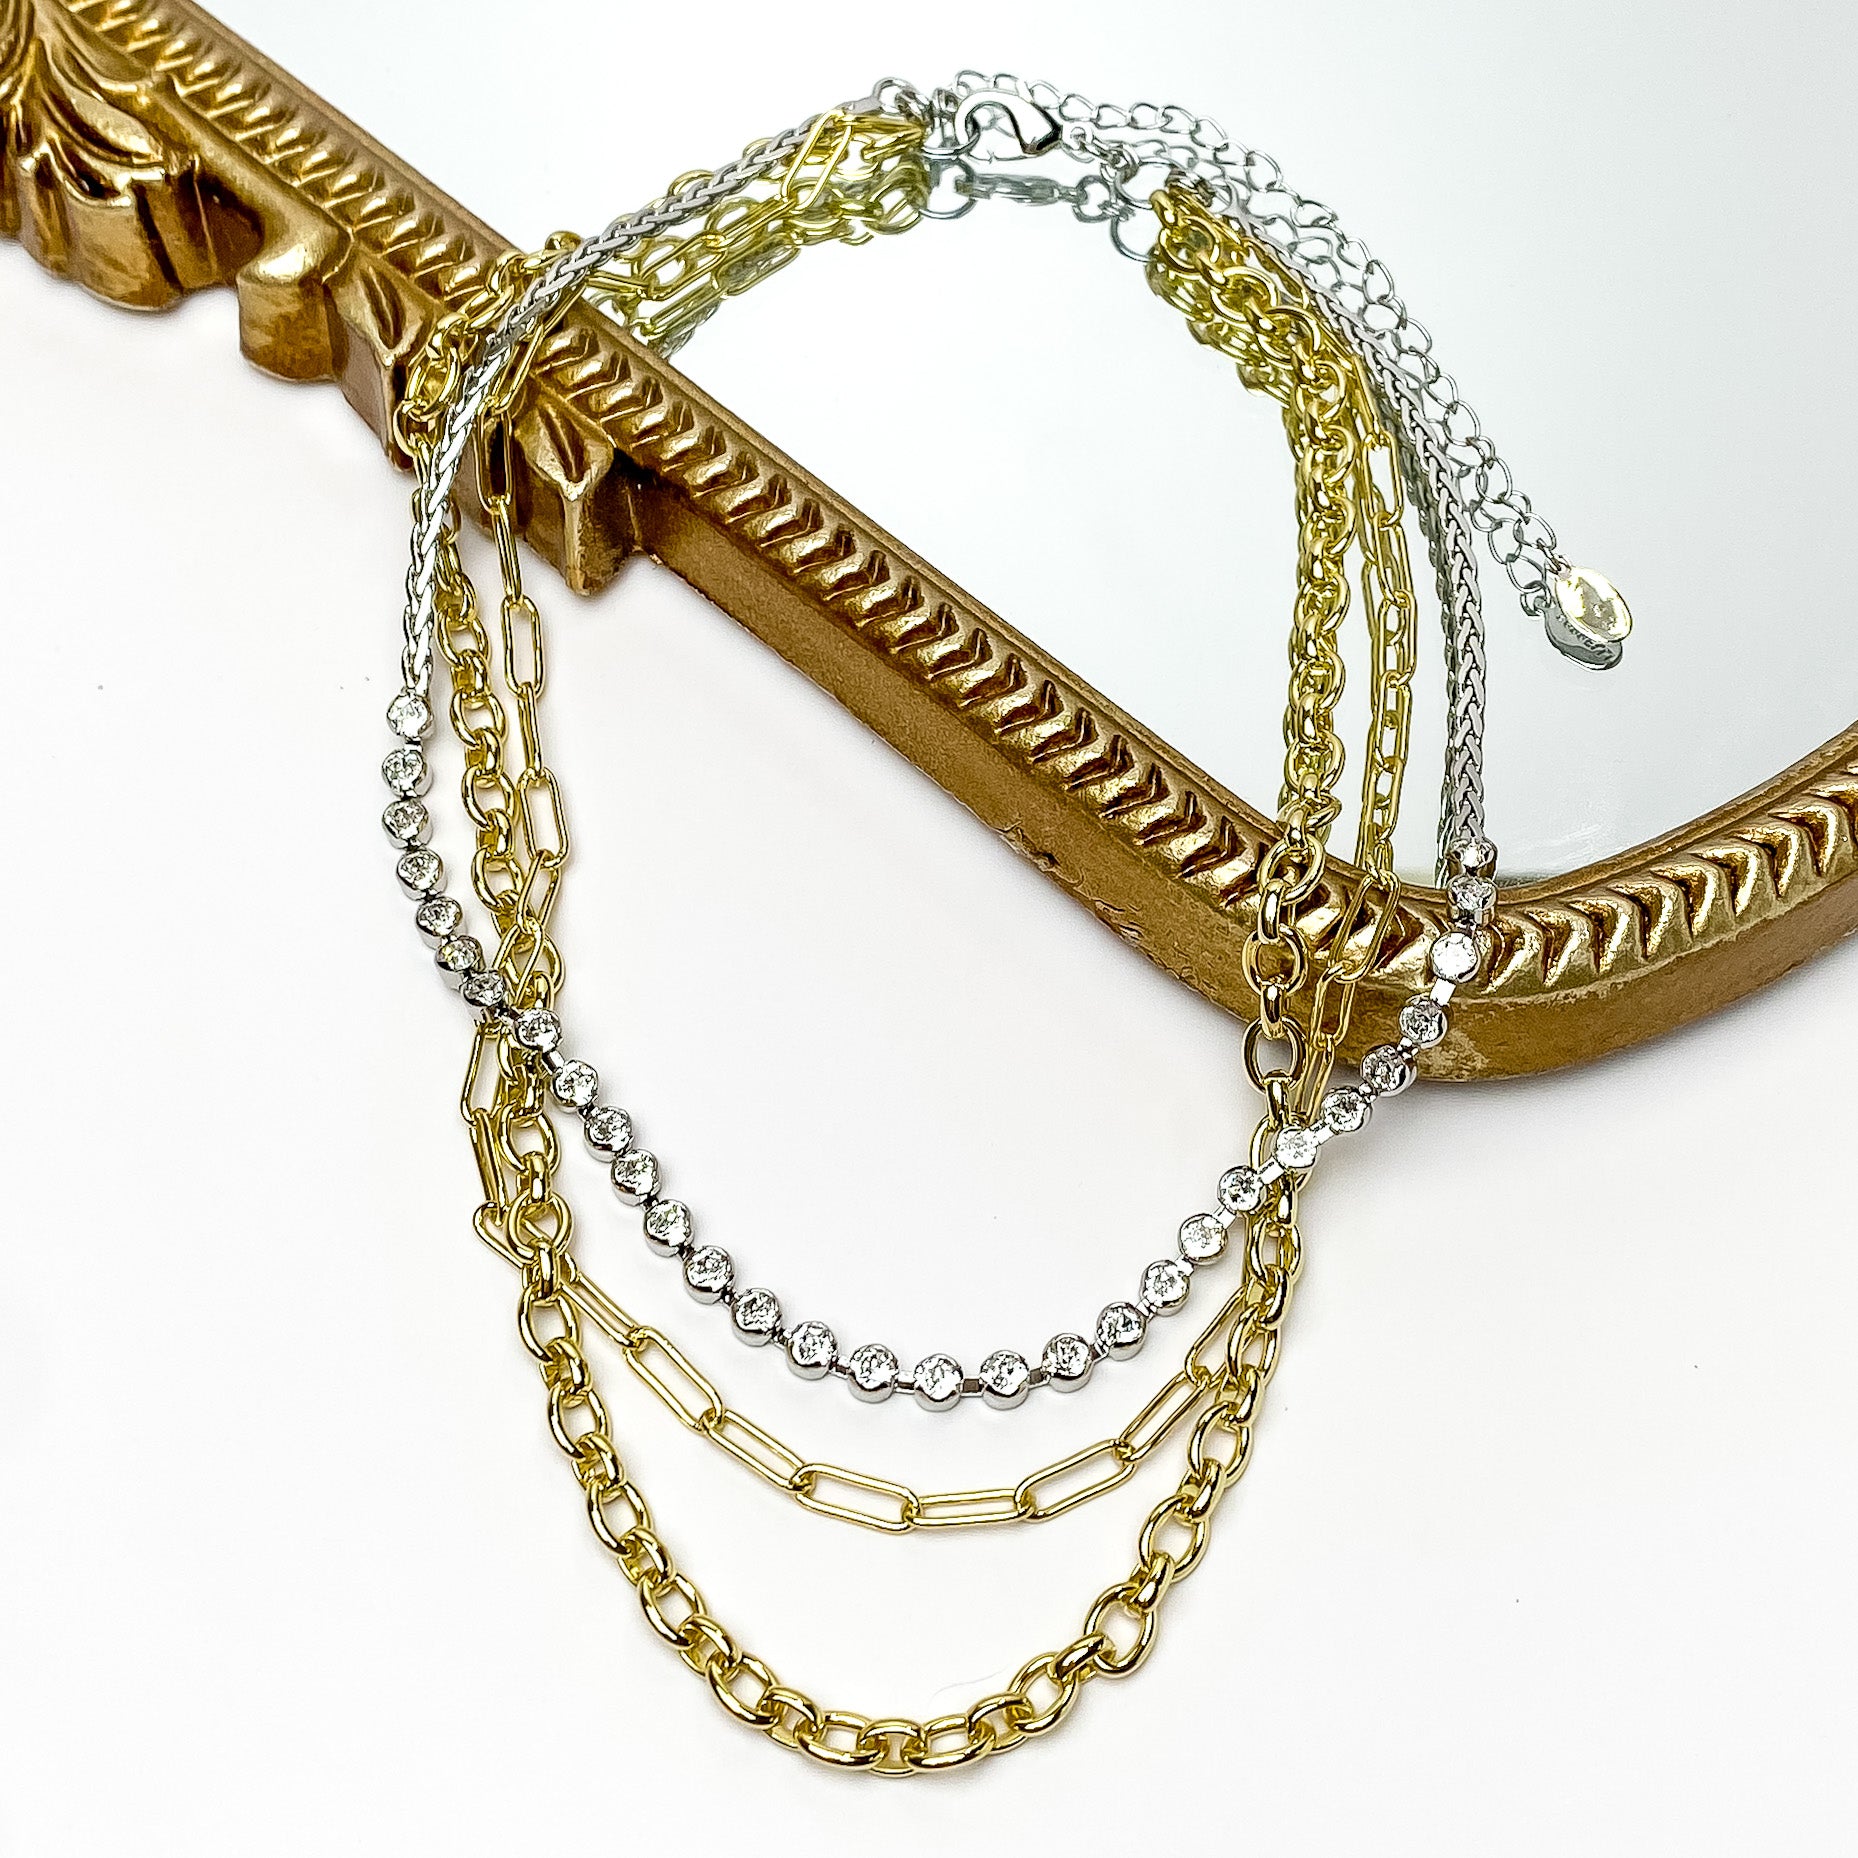 Pictured is a three strand necklace in mixed metal. There are two different chain strands in gold and the last strand is silver with round, clear crystals. This necklace is pictured partially laying on a gold mirror on a white background.    